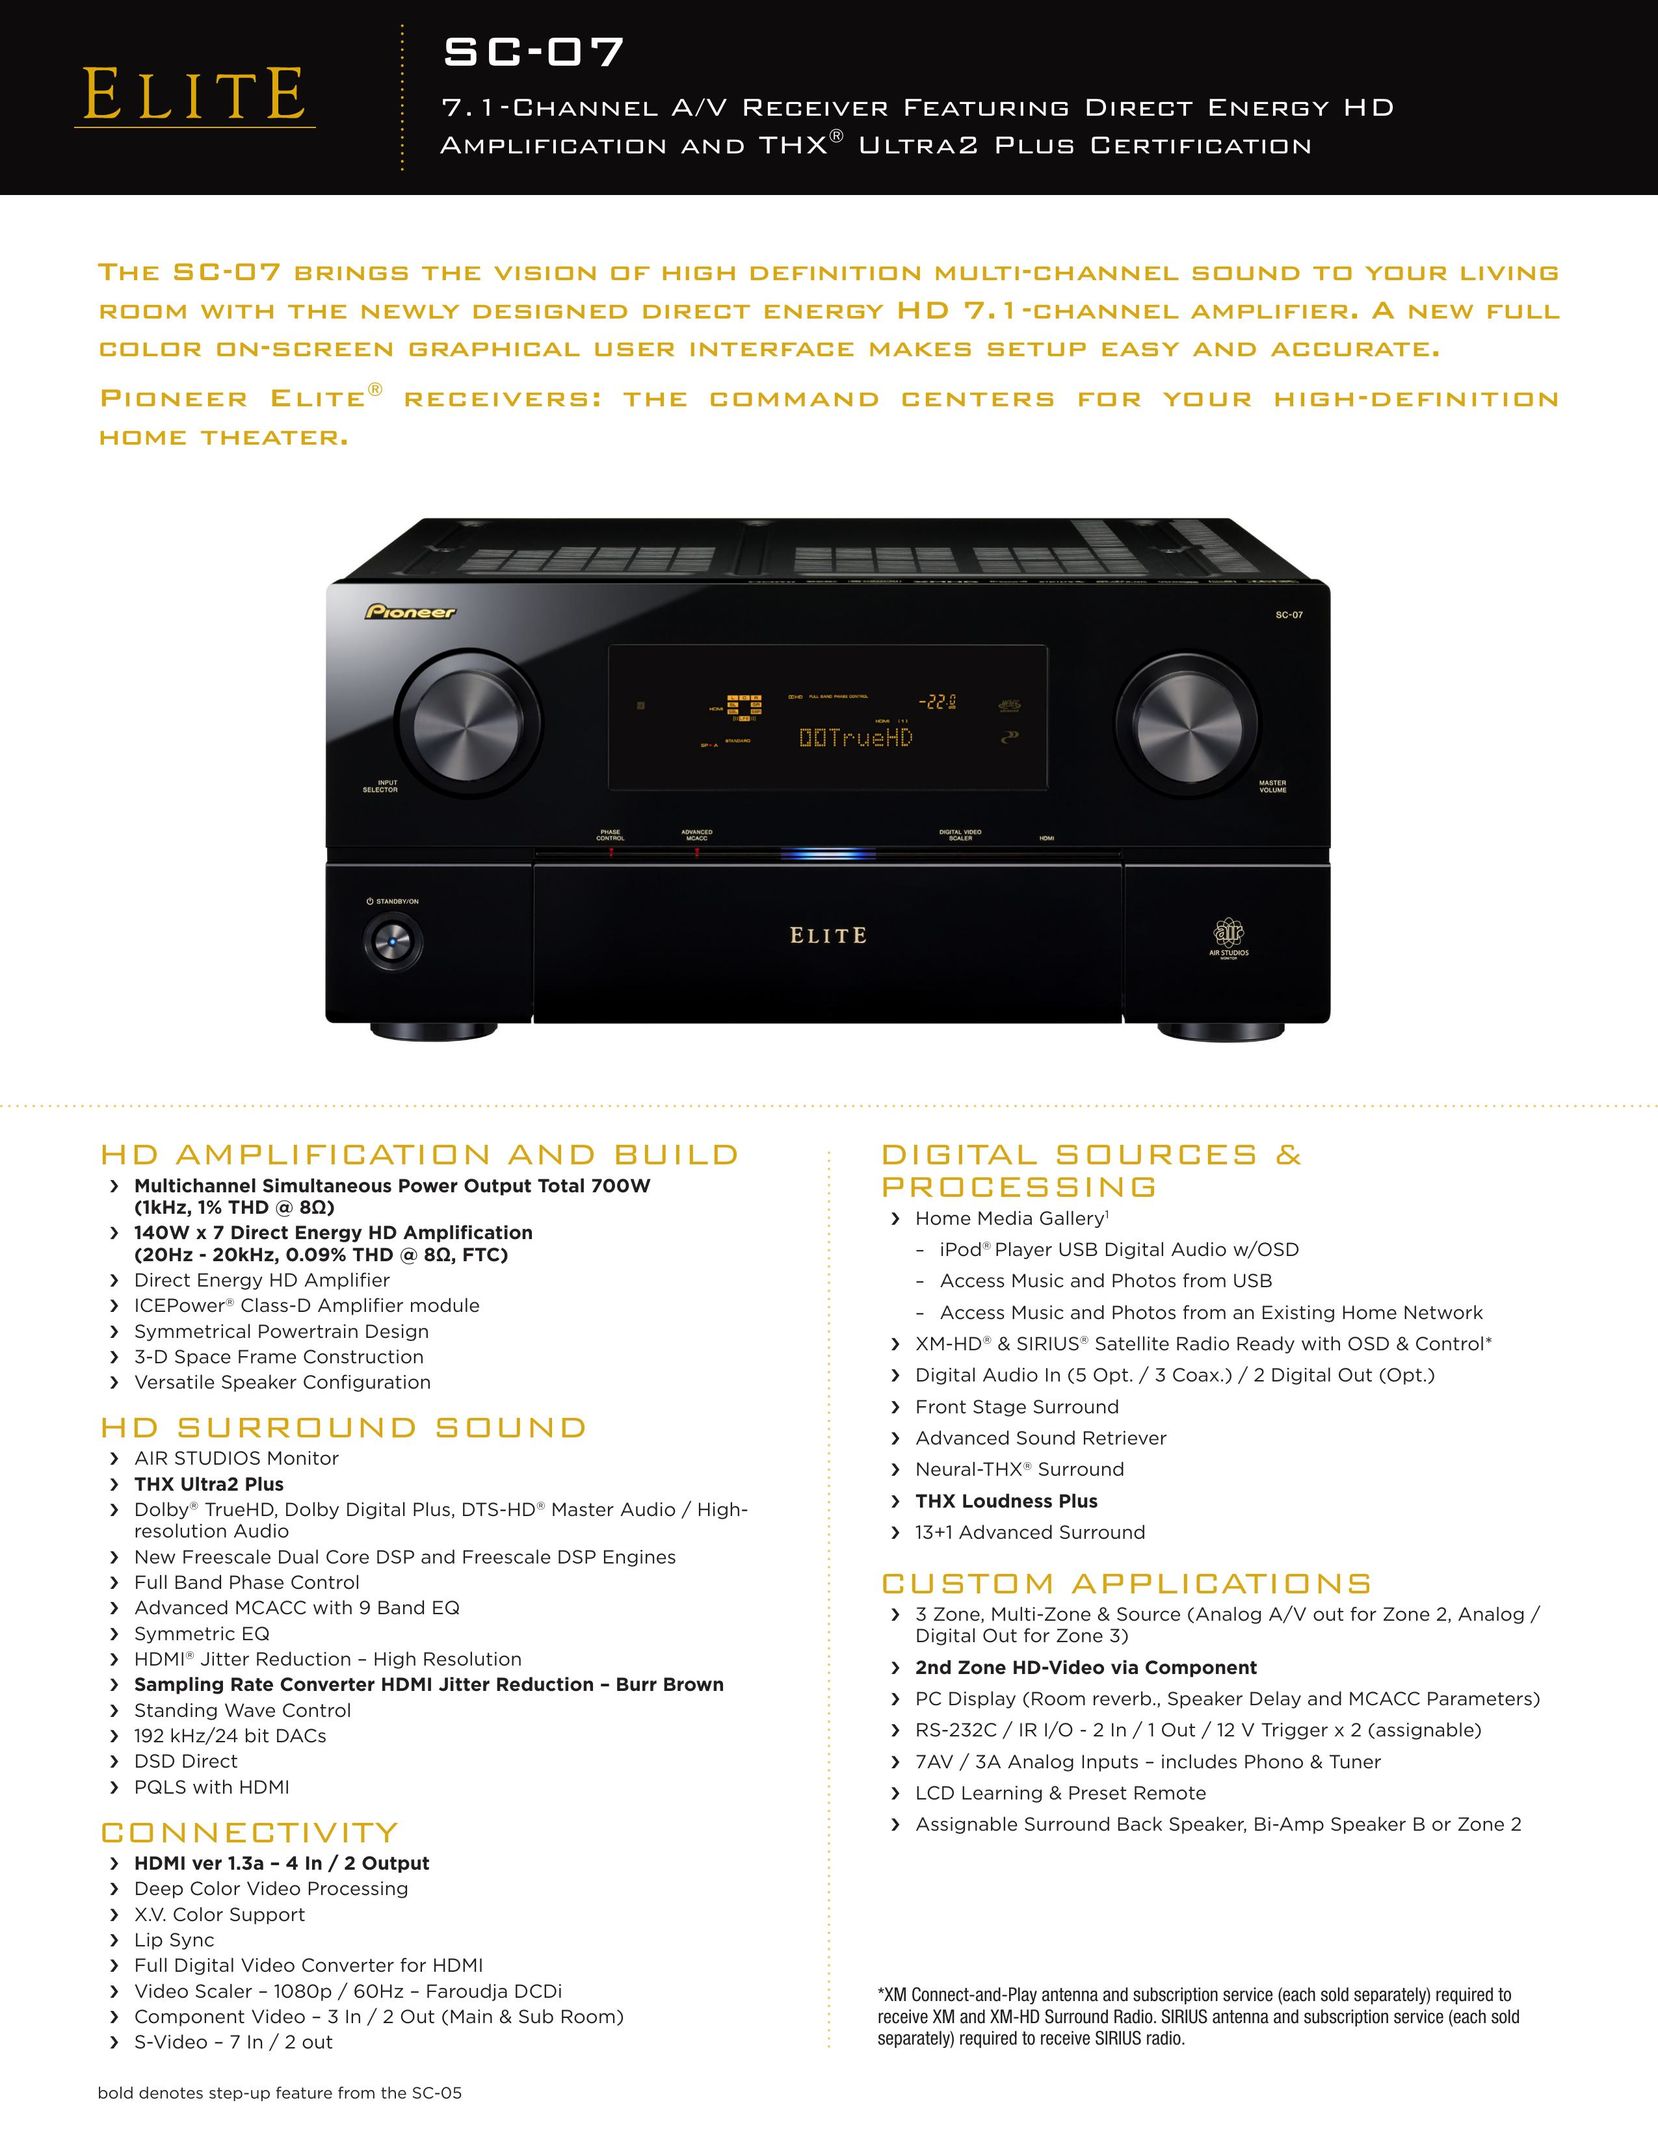 Elite SC-07 Stereo Receiver User Manual (Page 1)